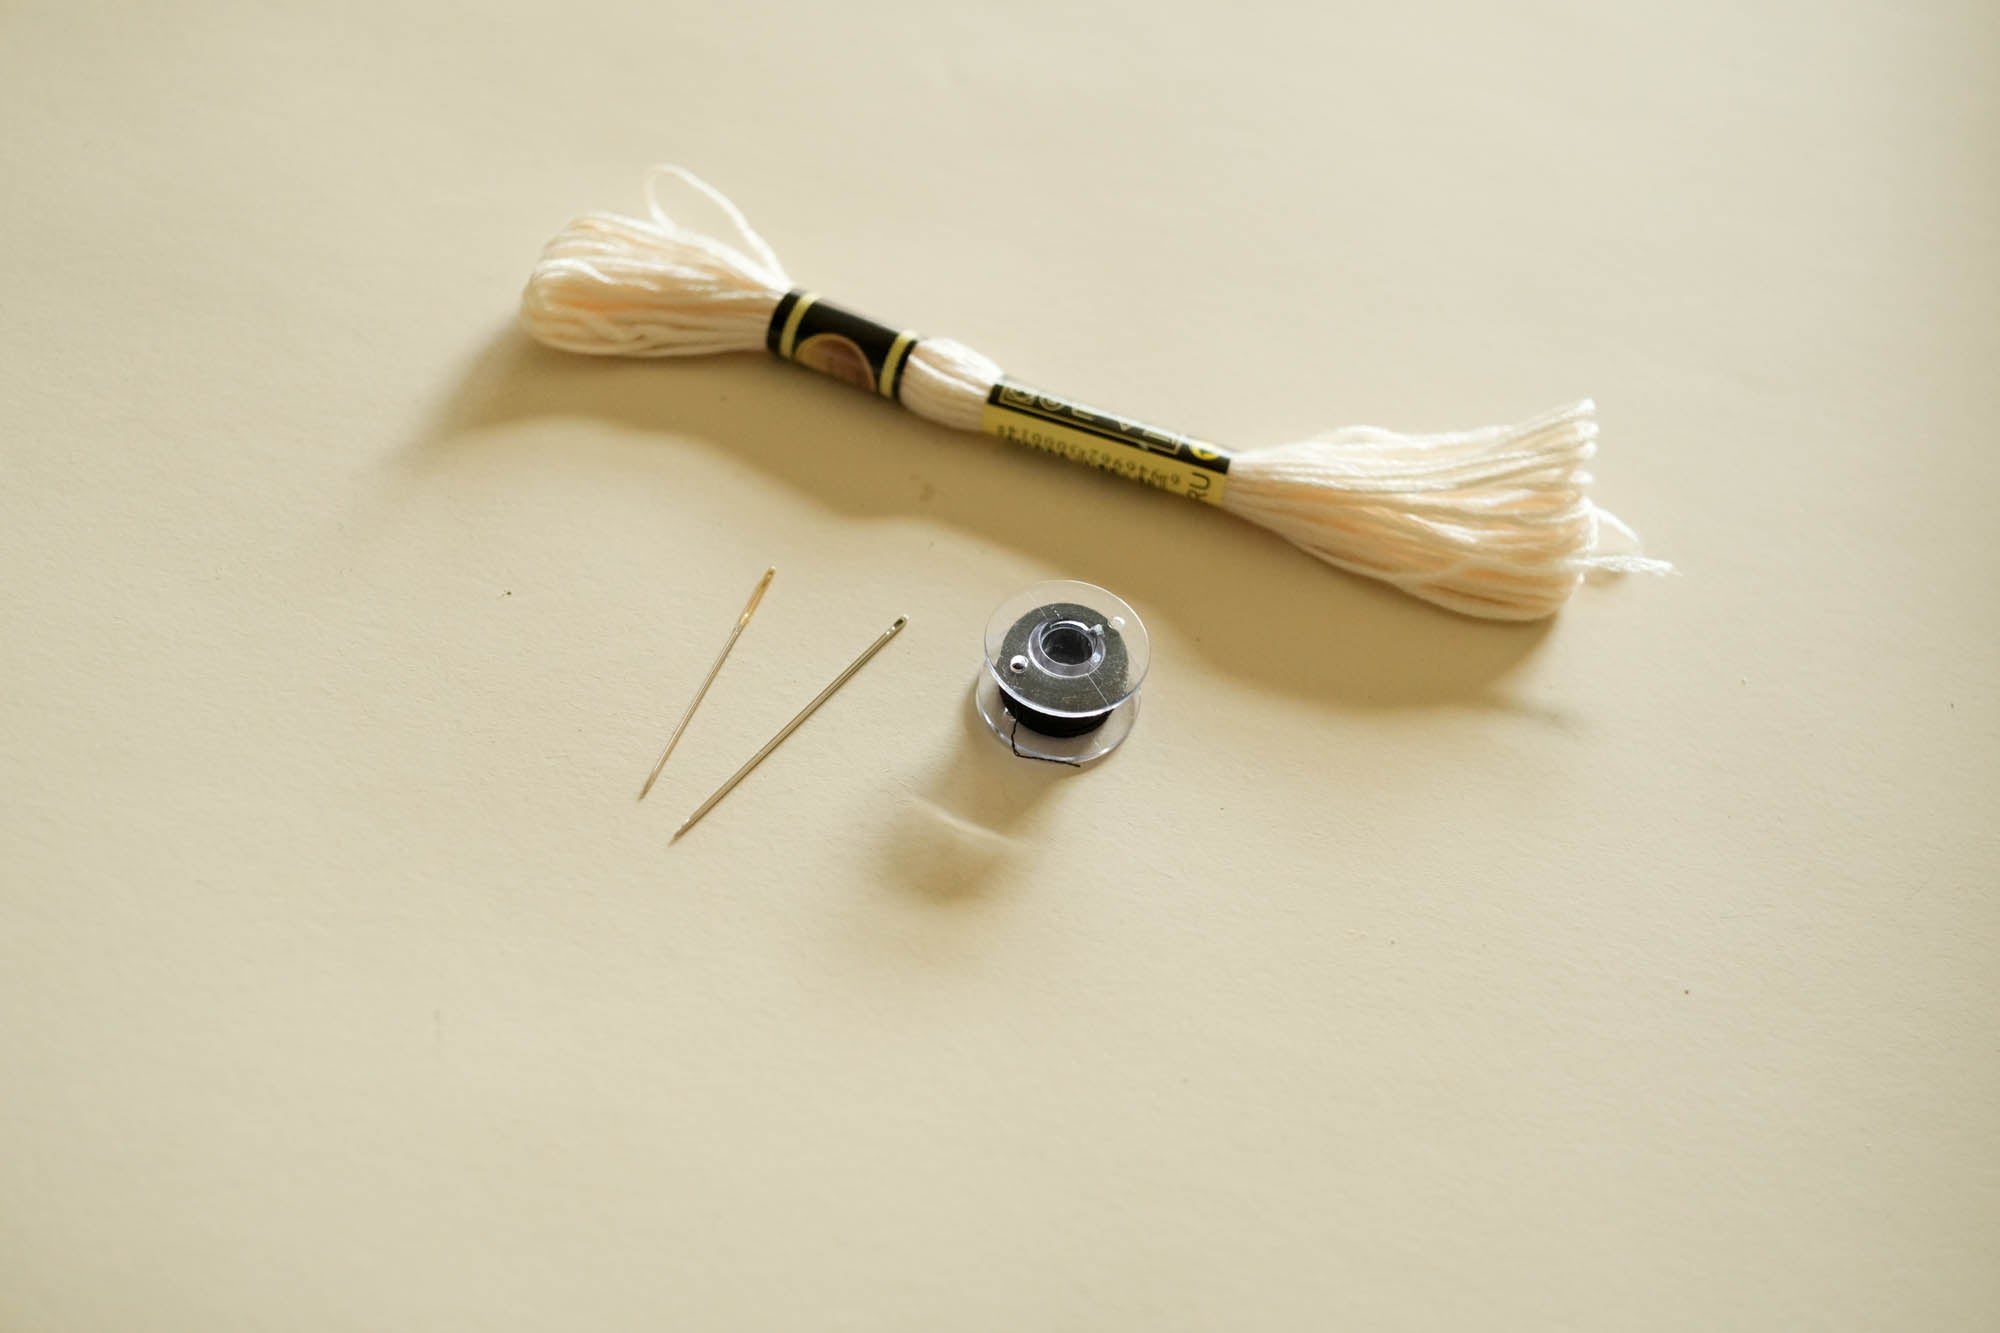 sewing needles and thread